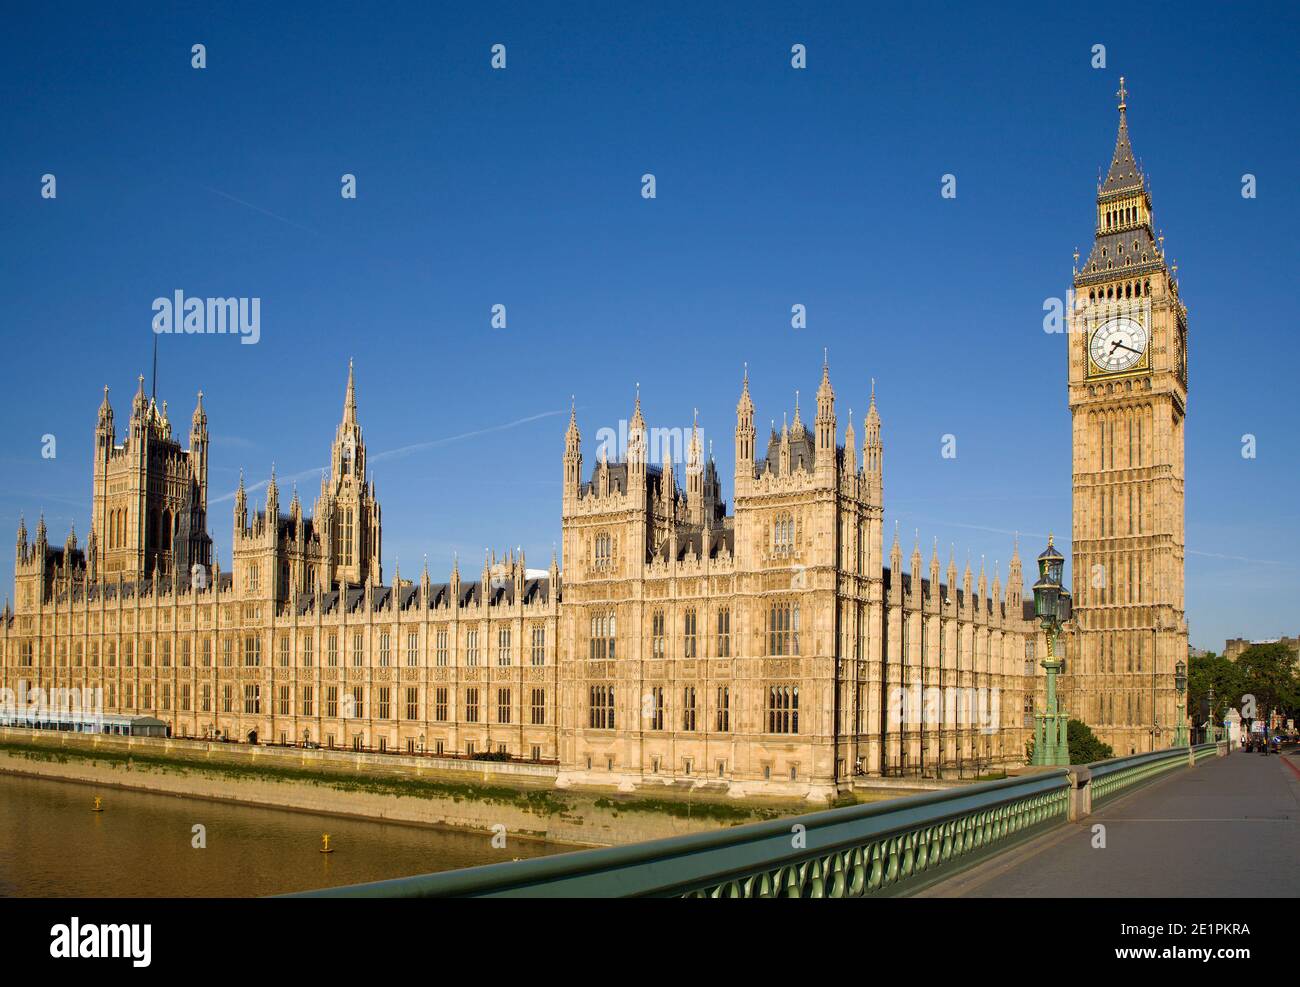 London - The parliament and Big Ben in the morning light Stock Photo